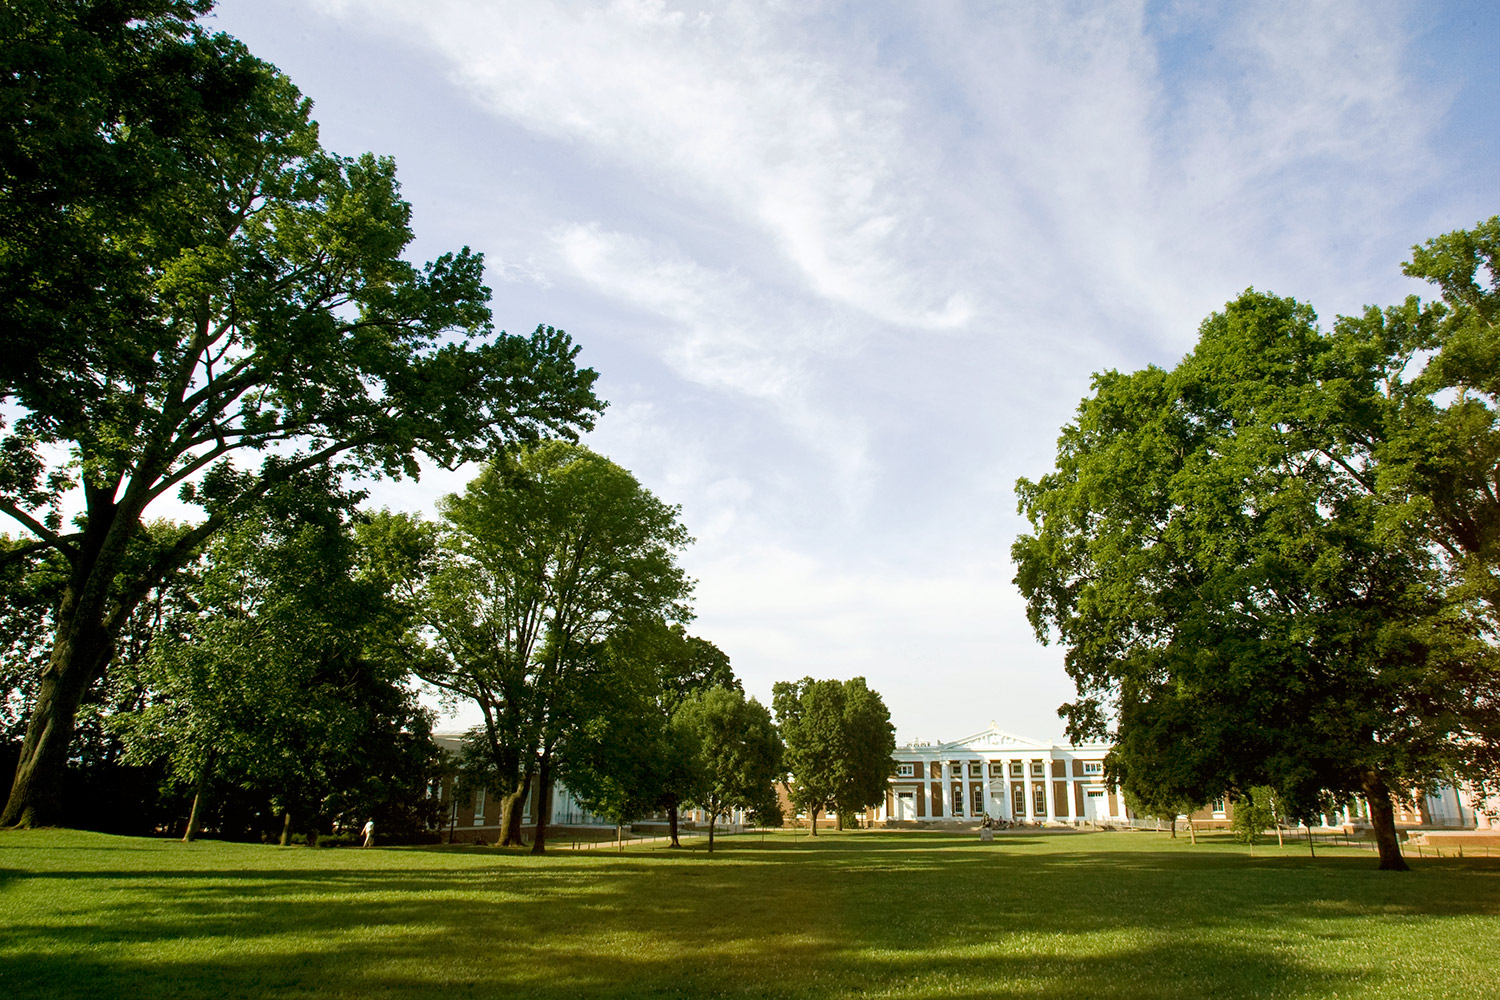 UVA's Lawn and Old Cabell Hall